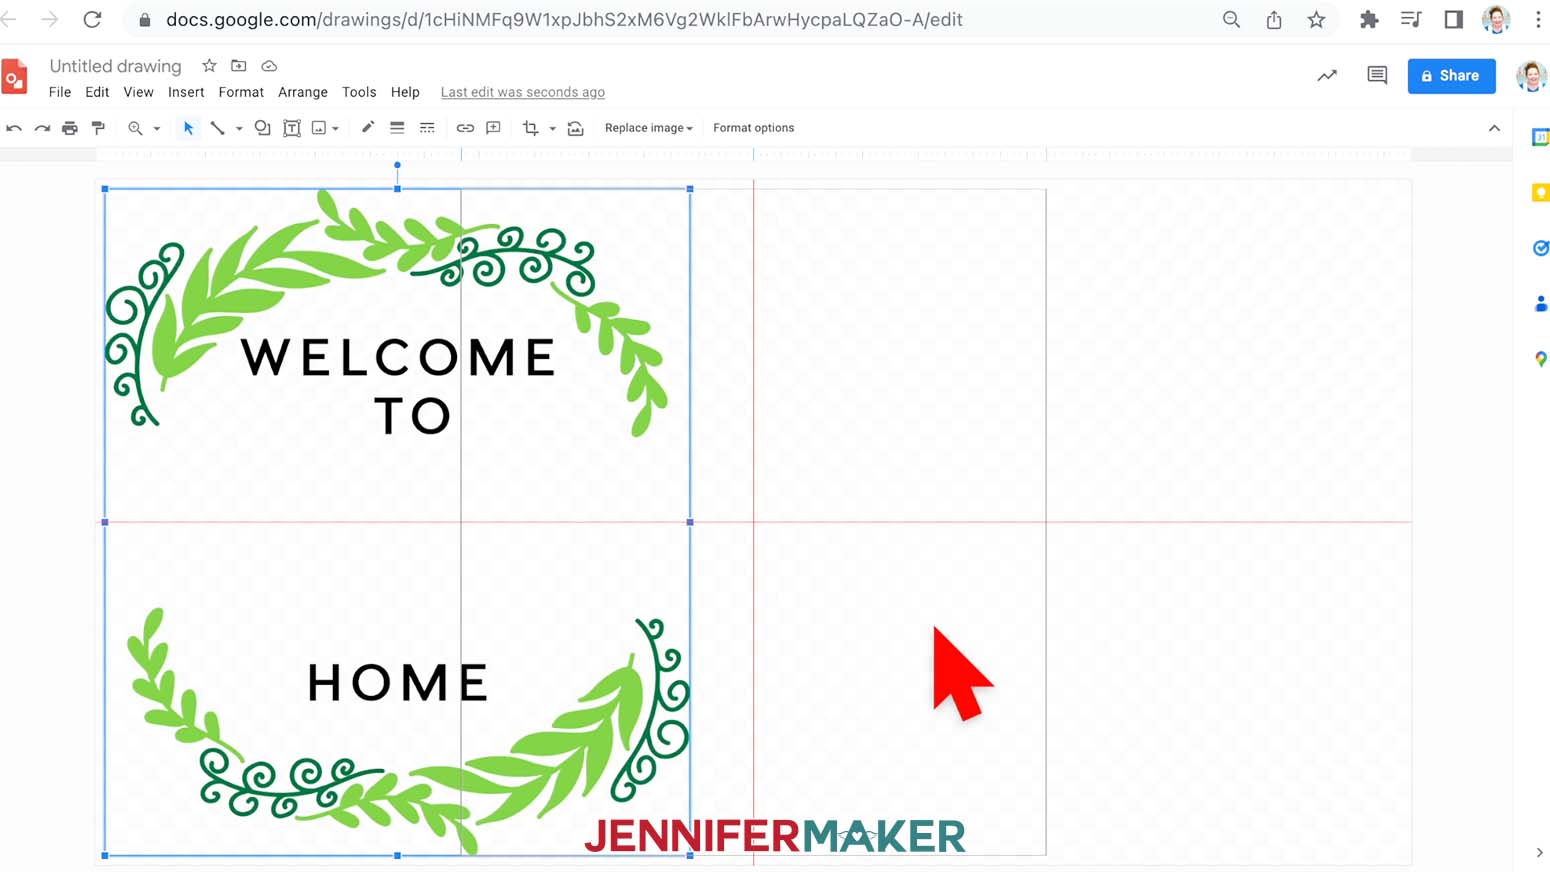 centering image on google drawings canvas red lines showing